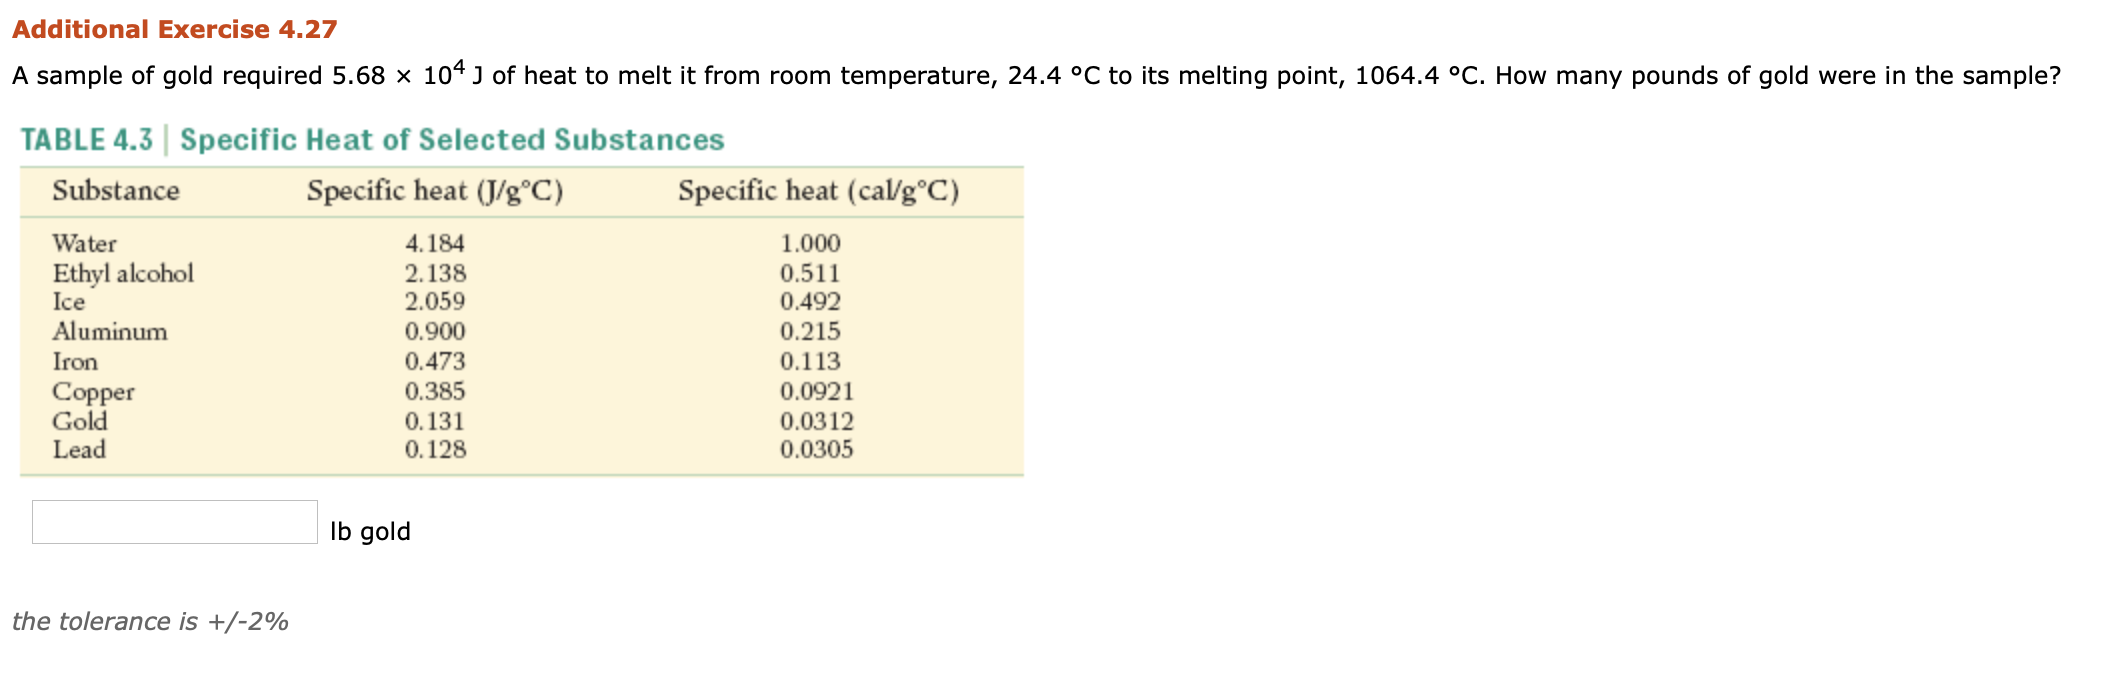 Additional Exercise 4.27
A sample of gold required 5.68 × 104 J of heat to melt it from room temperature, 24.4 °C to its melting point, 1064.4 °C. How many pounds of gold were in the sample?
TABLE 4.3 | Specific Heat of Selected Substances
Substance
Specific heat (J/g°°C)
Specific heat (cal/g°C)
4.184
2.138
2.059
Water
1.000
Ethyl alcohol
Ice
0.511
0.492
Aluminum
Iron
0.900
0.215
0.473
0.113
Copper
Gold
Lead
0.385
0.0921
0.0312
0.0305
0.131
0.128
Ib gold
the tolerance is +/-2%
